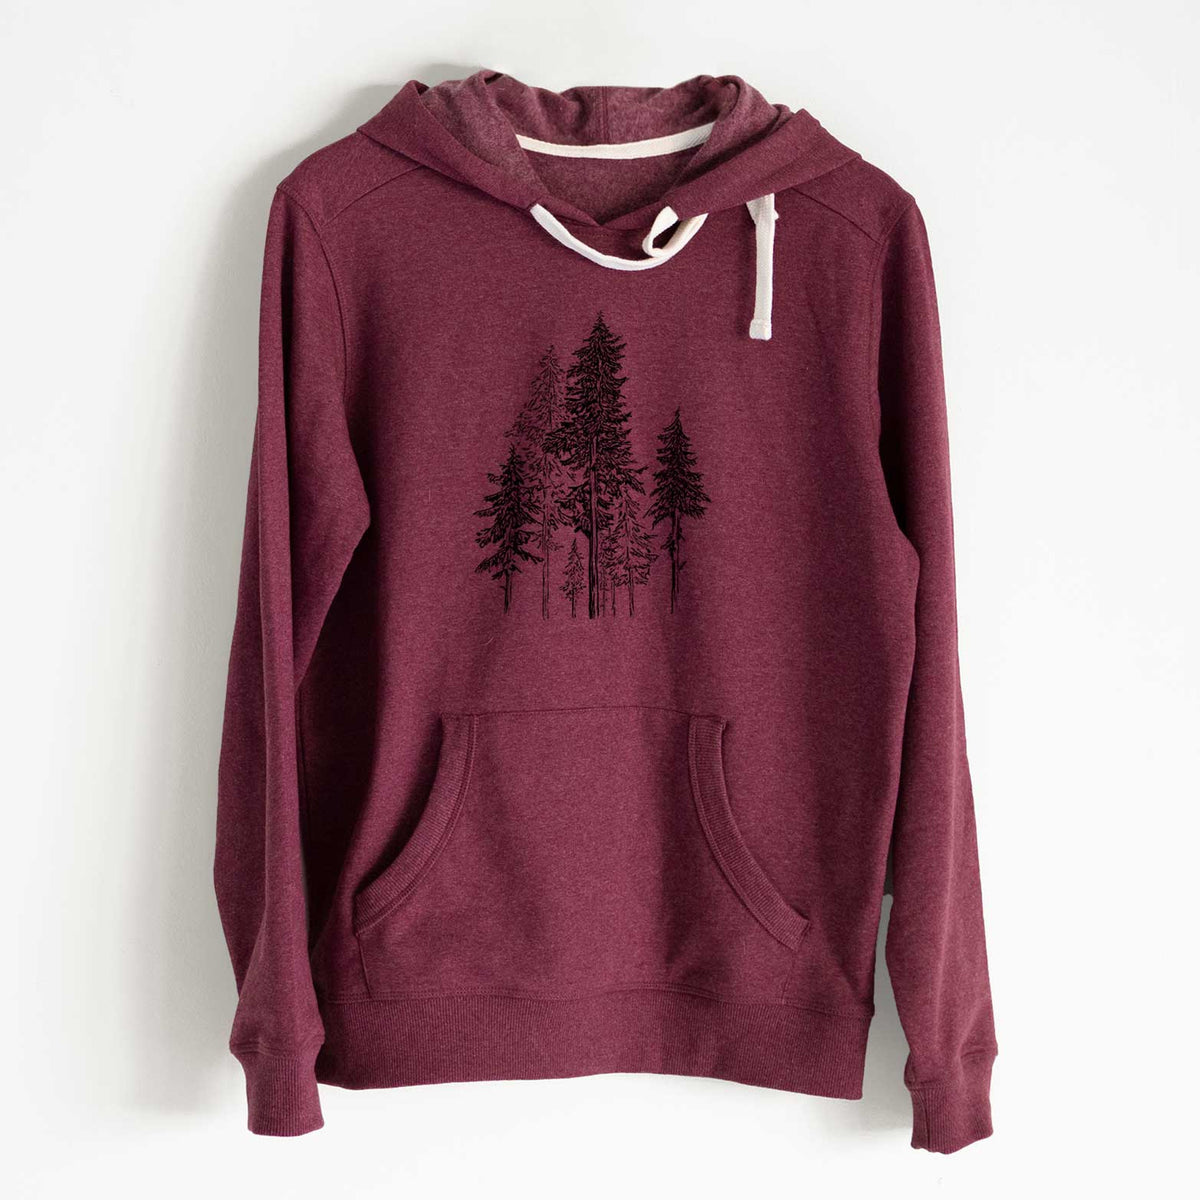 Hemlock Forest - Unisex Recycled Hoodie - CLOSEOUT - FINAL SALE